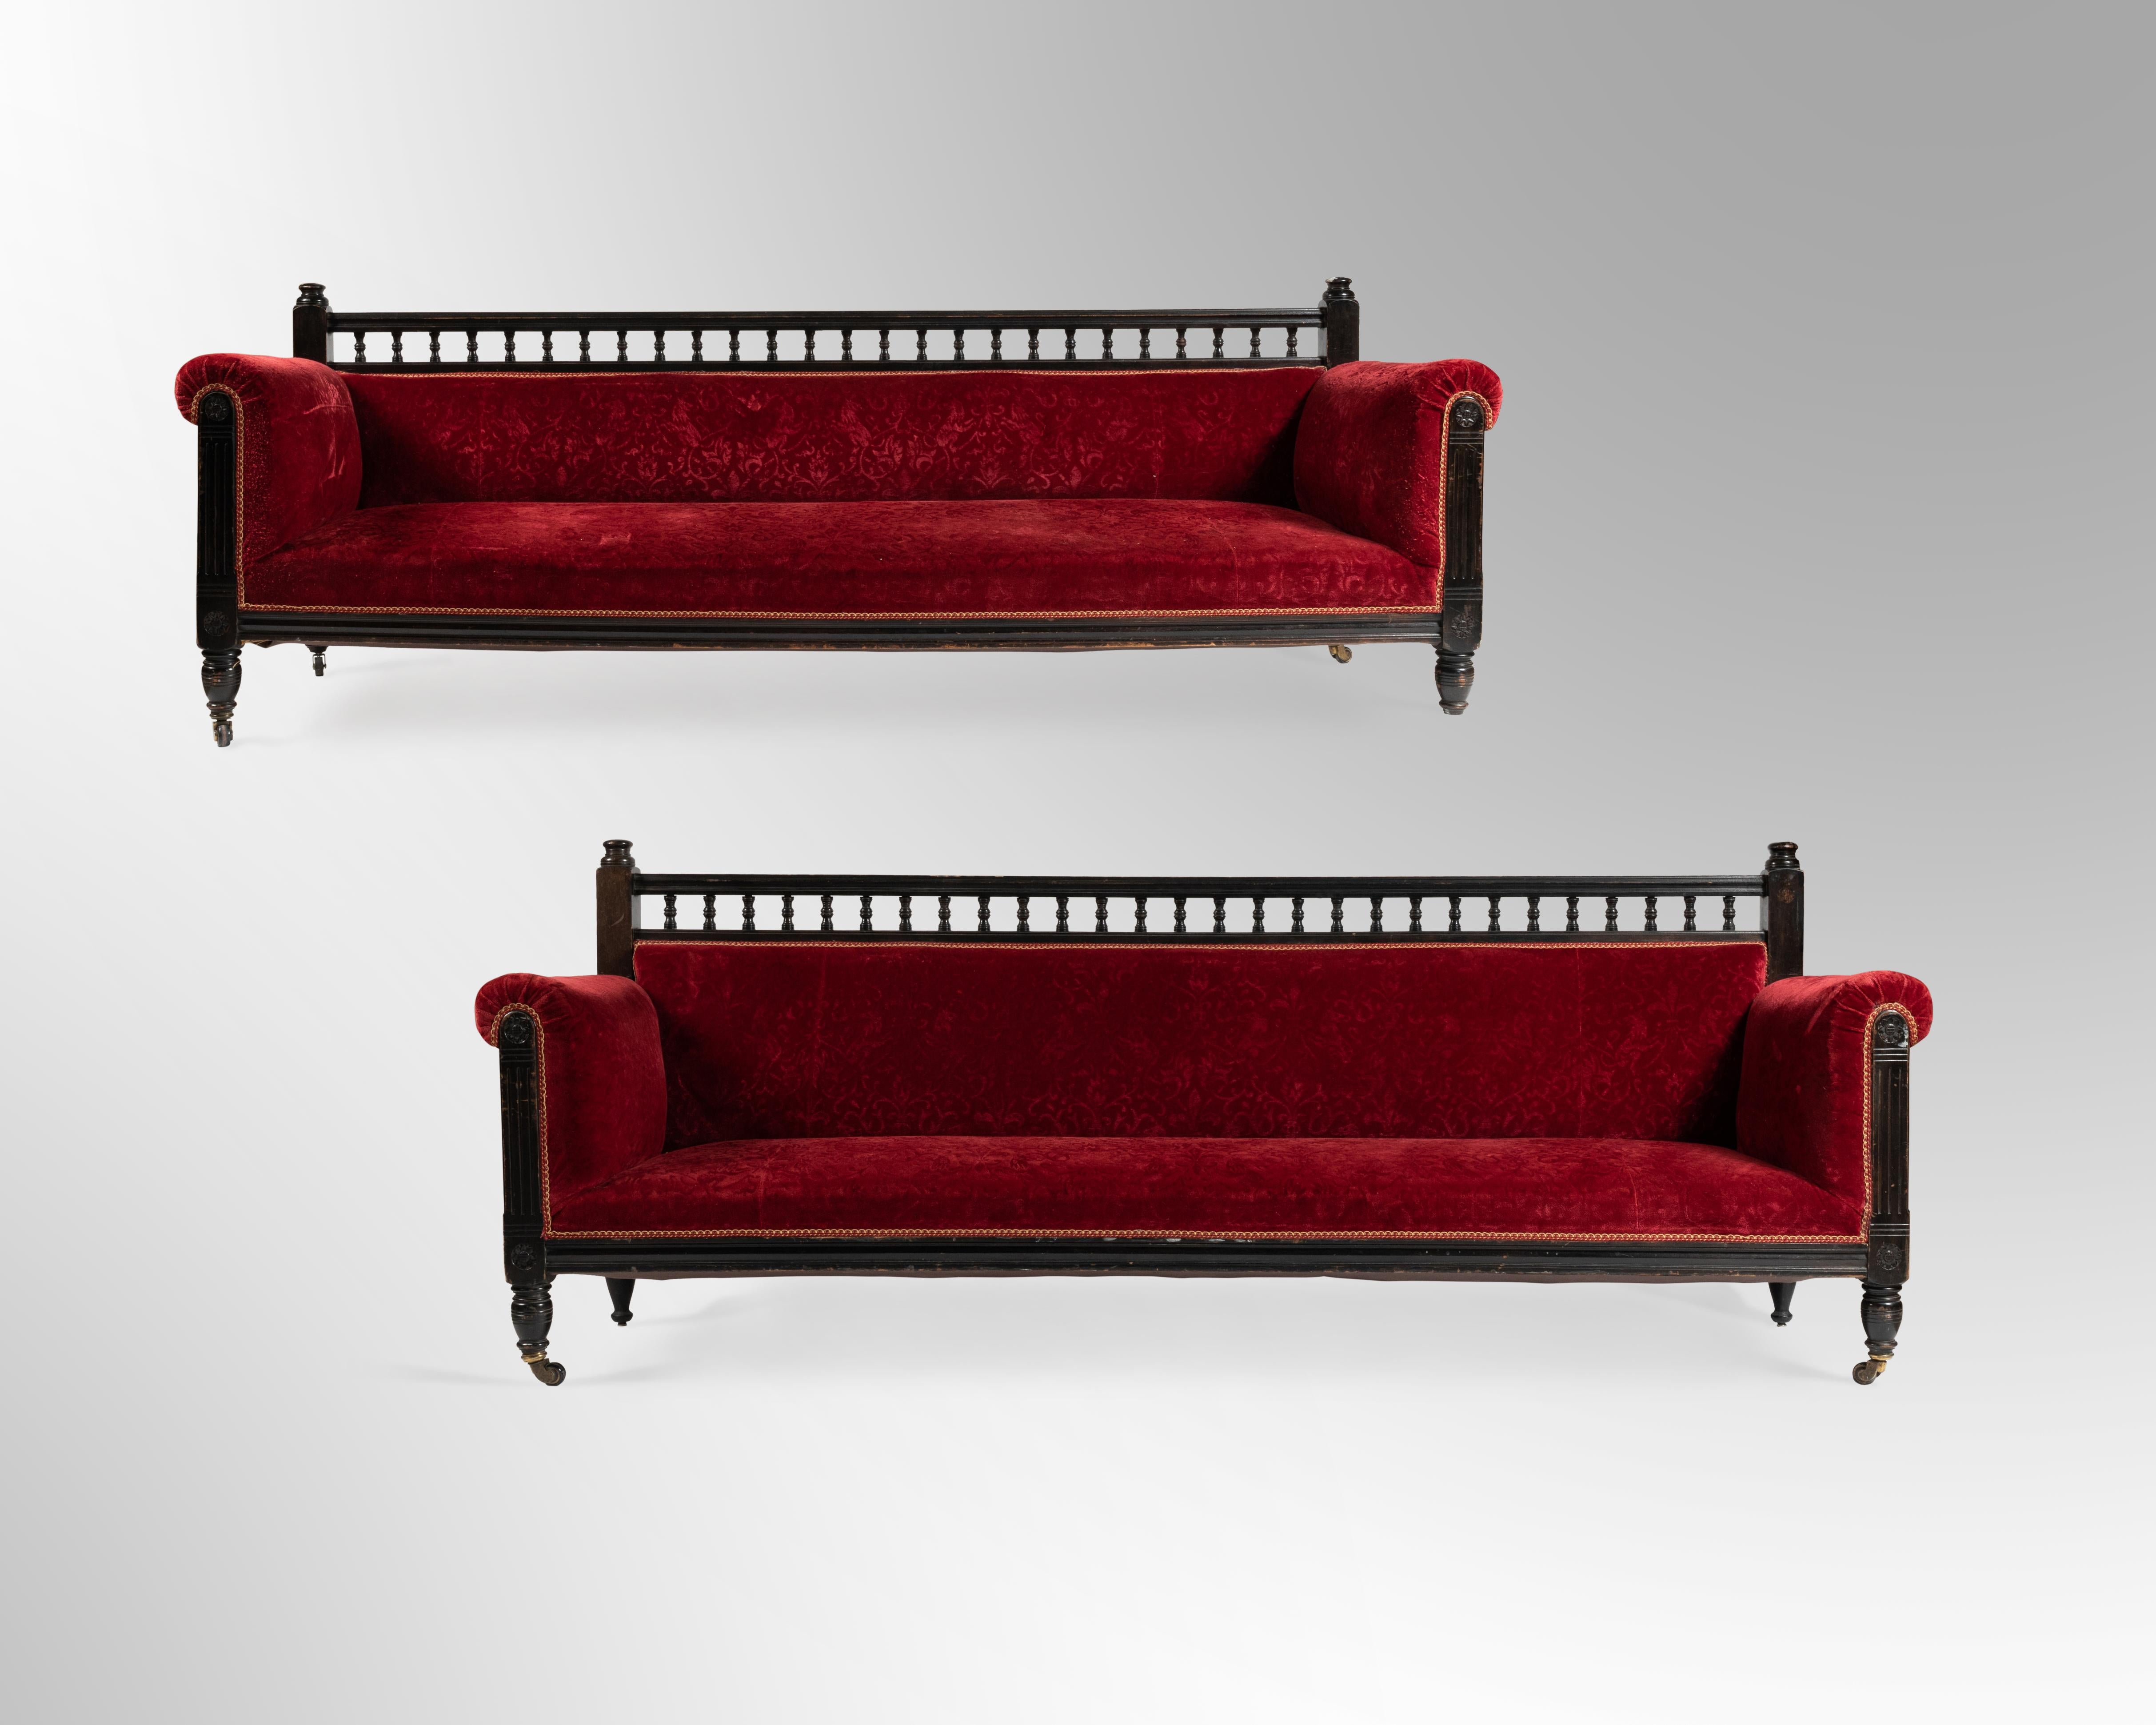 Aesthetic movement. Pair of large sofas in turned and blackened wood, decorated with balusters, covered in red embossed velvet. Circa 1880.